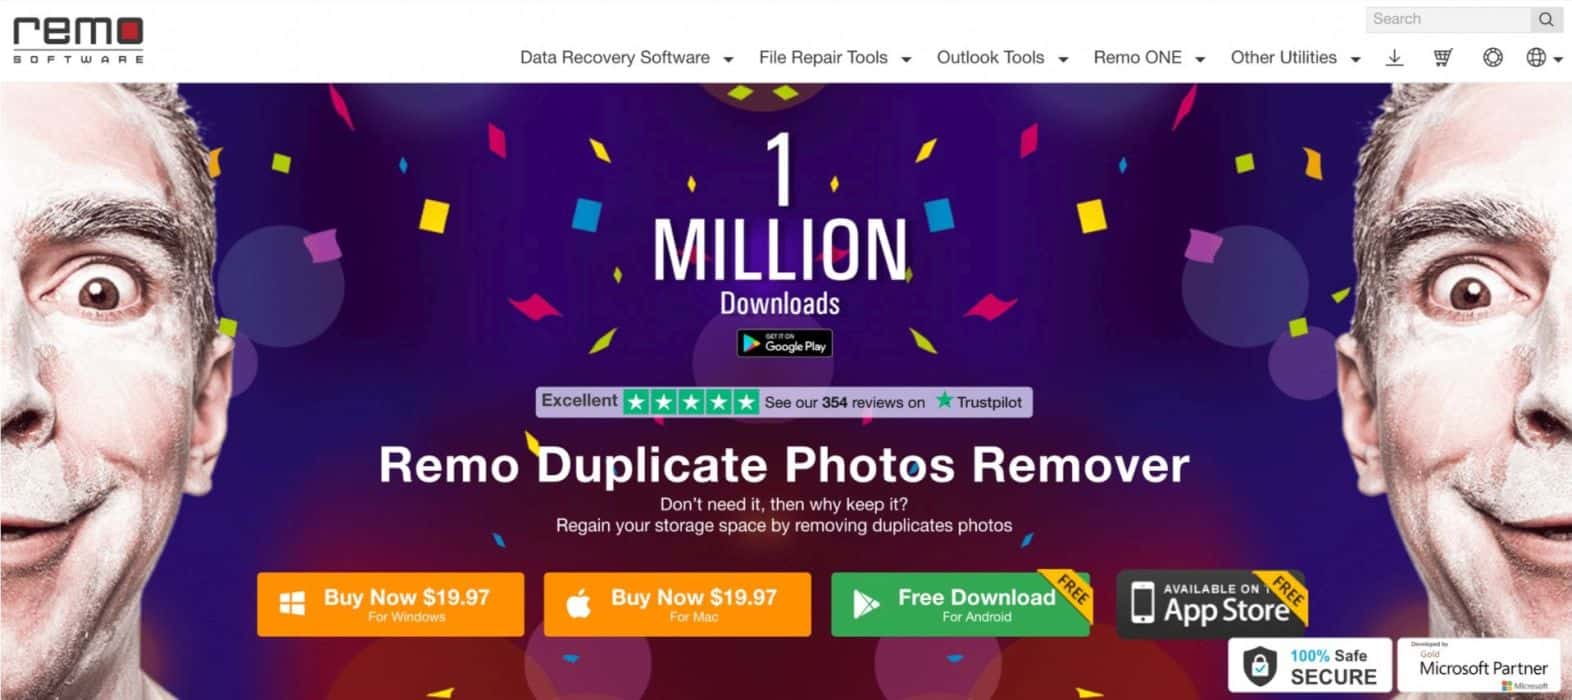 Homepage of Remo